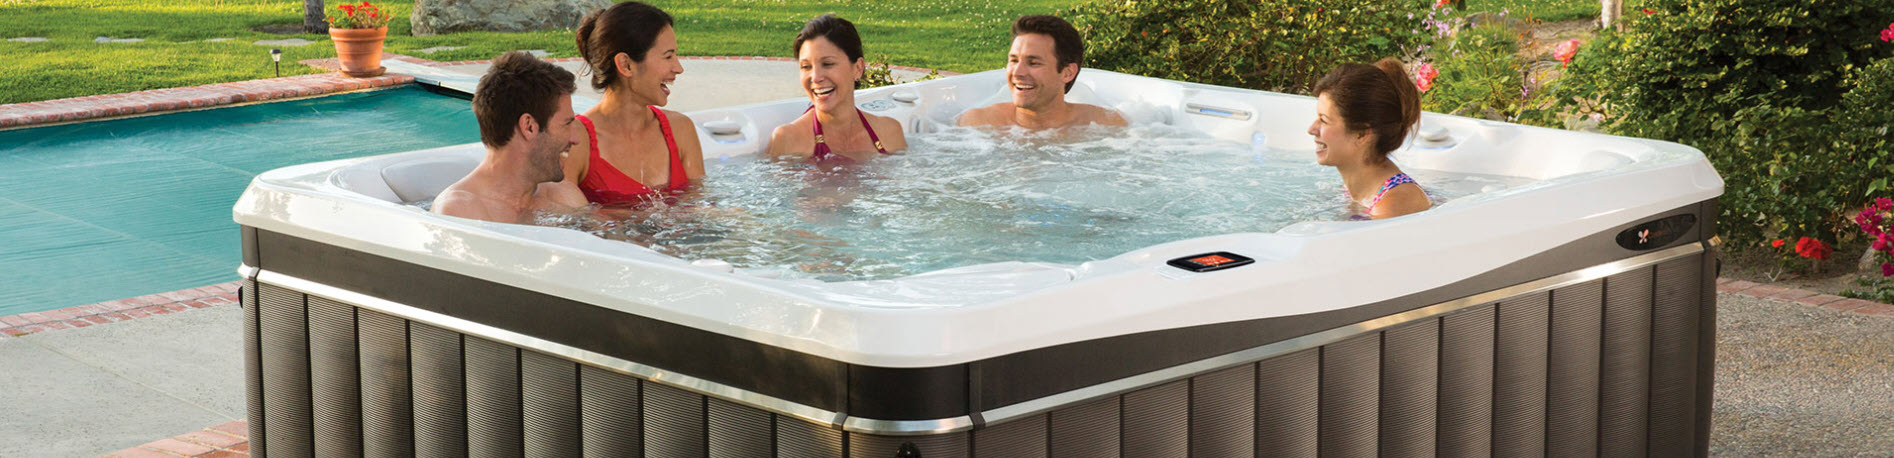 Why You Need Hot Water Hydrotherapy at Home, Plug and Play Hot Tubs Steamboat Springs